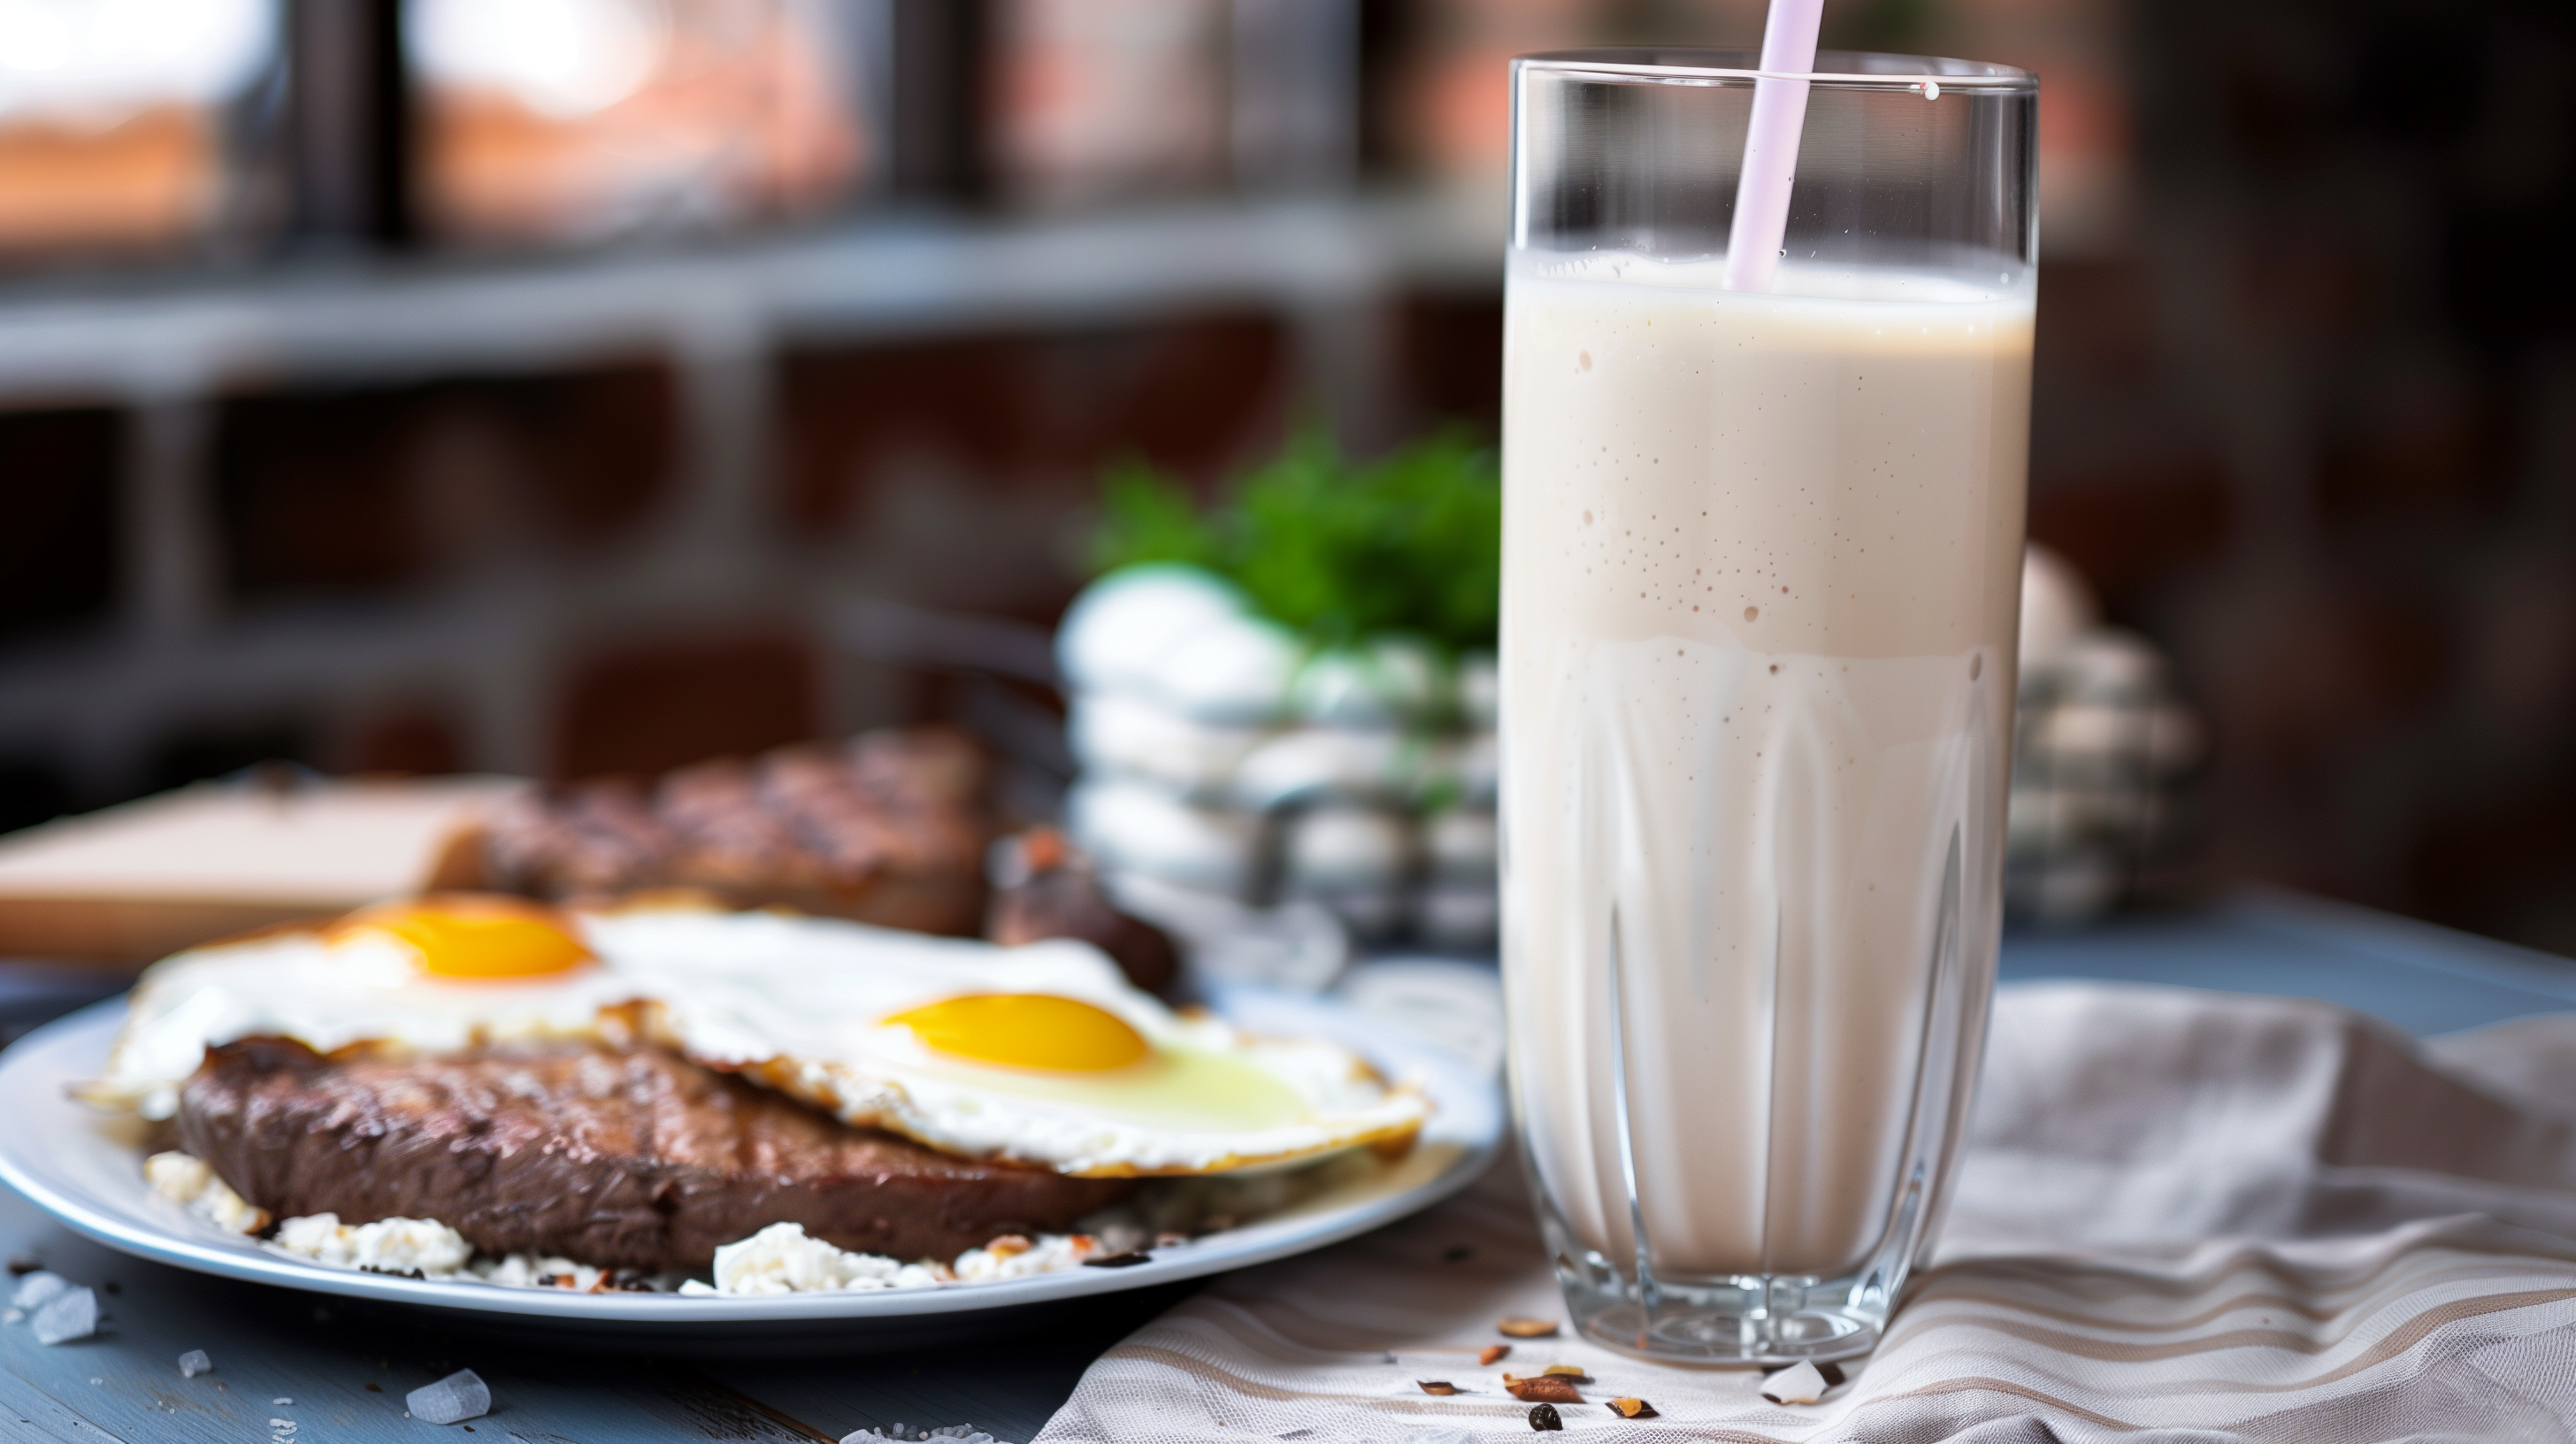 an extra high-protein breakfast: steak, eggs, and a protein shake